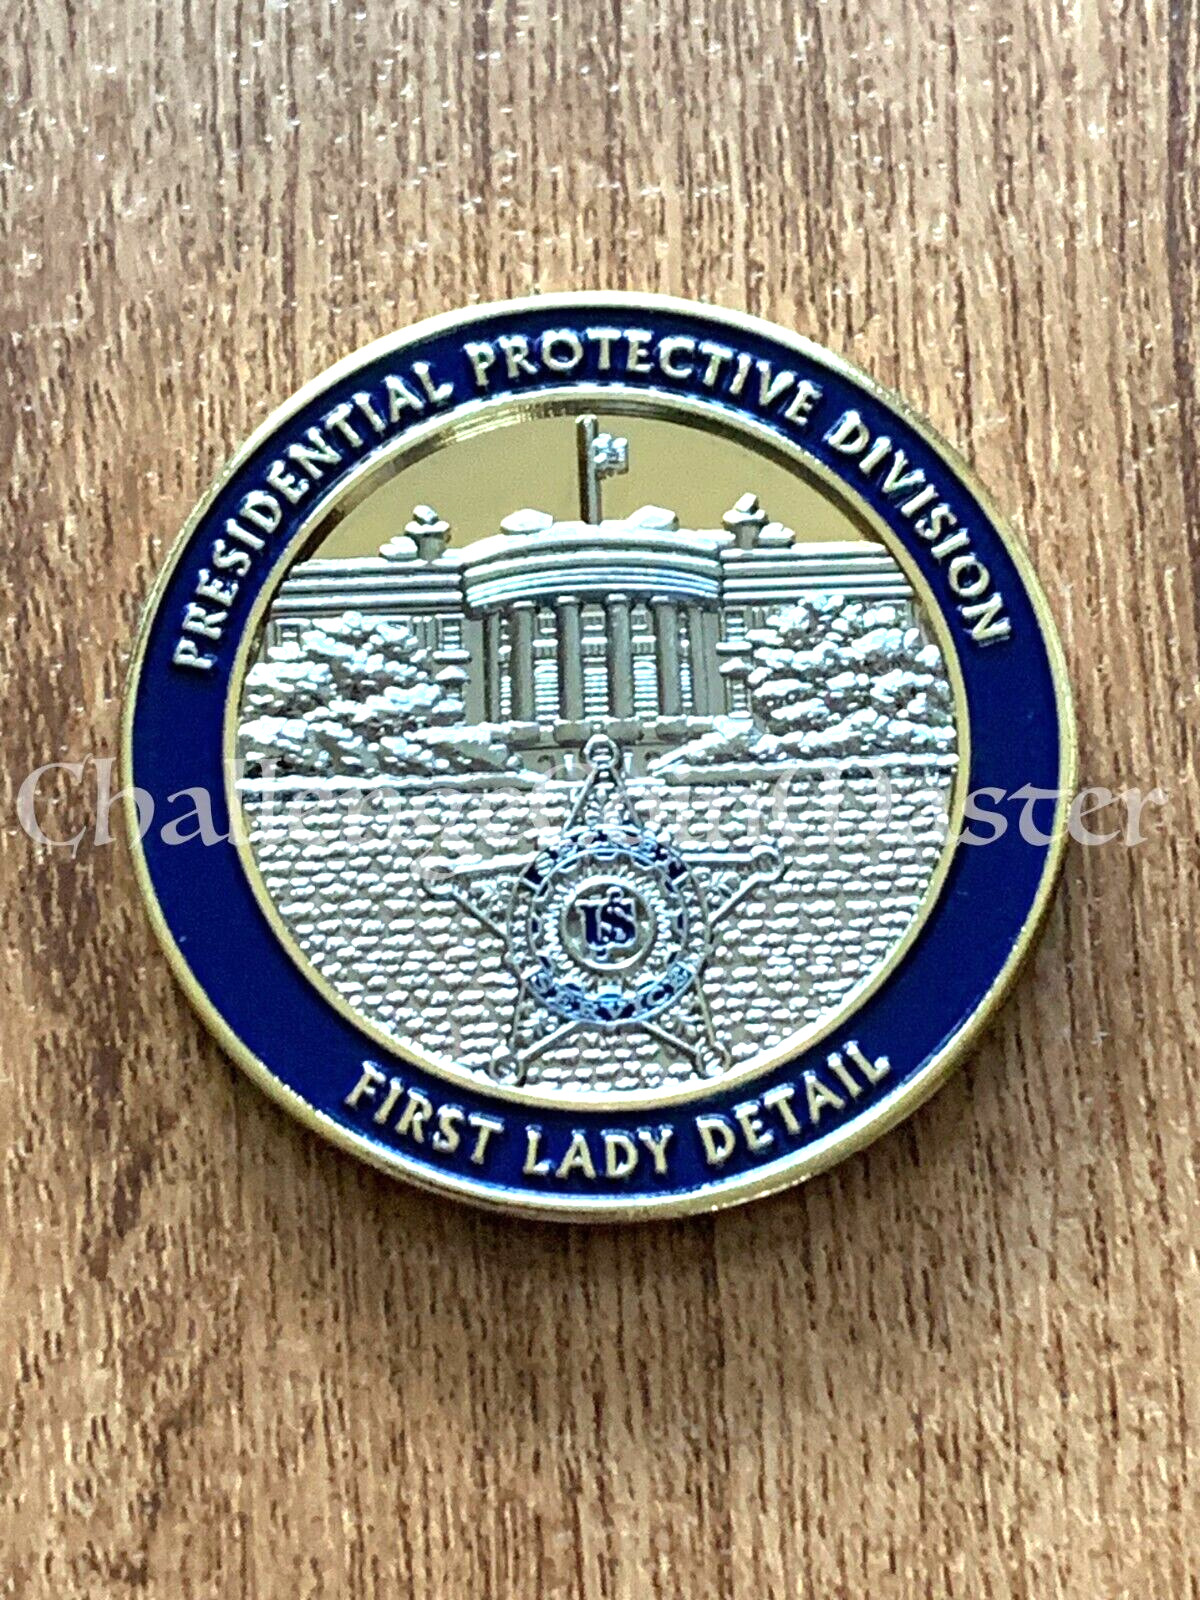 U.S. SECRET SERVICE PRESIDENTIAL PROTECTION FIRST LADY DETAIL CHALLENGE COIN 